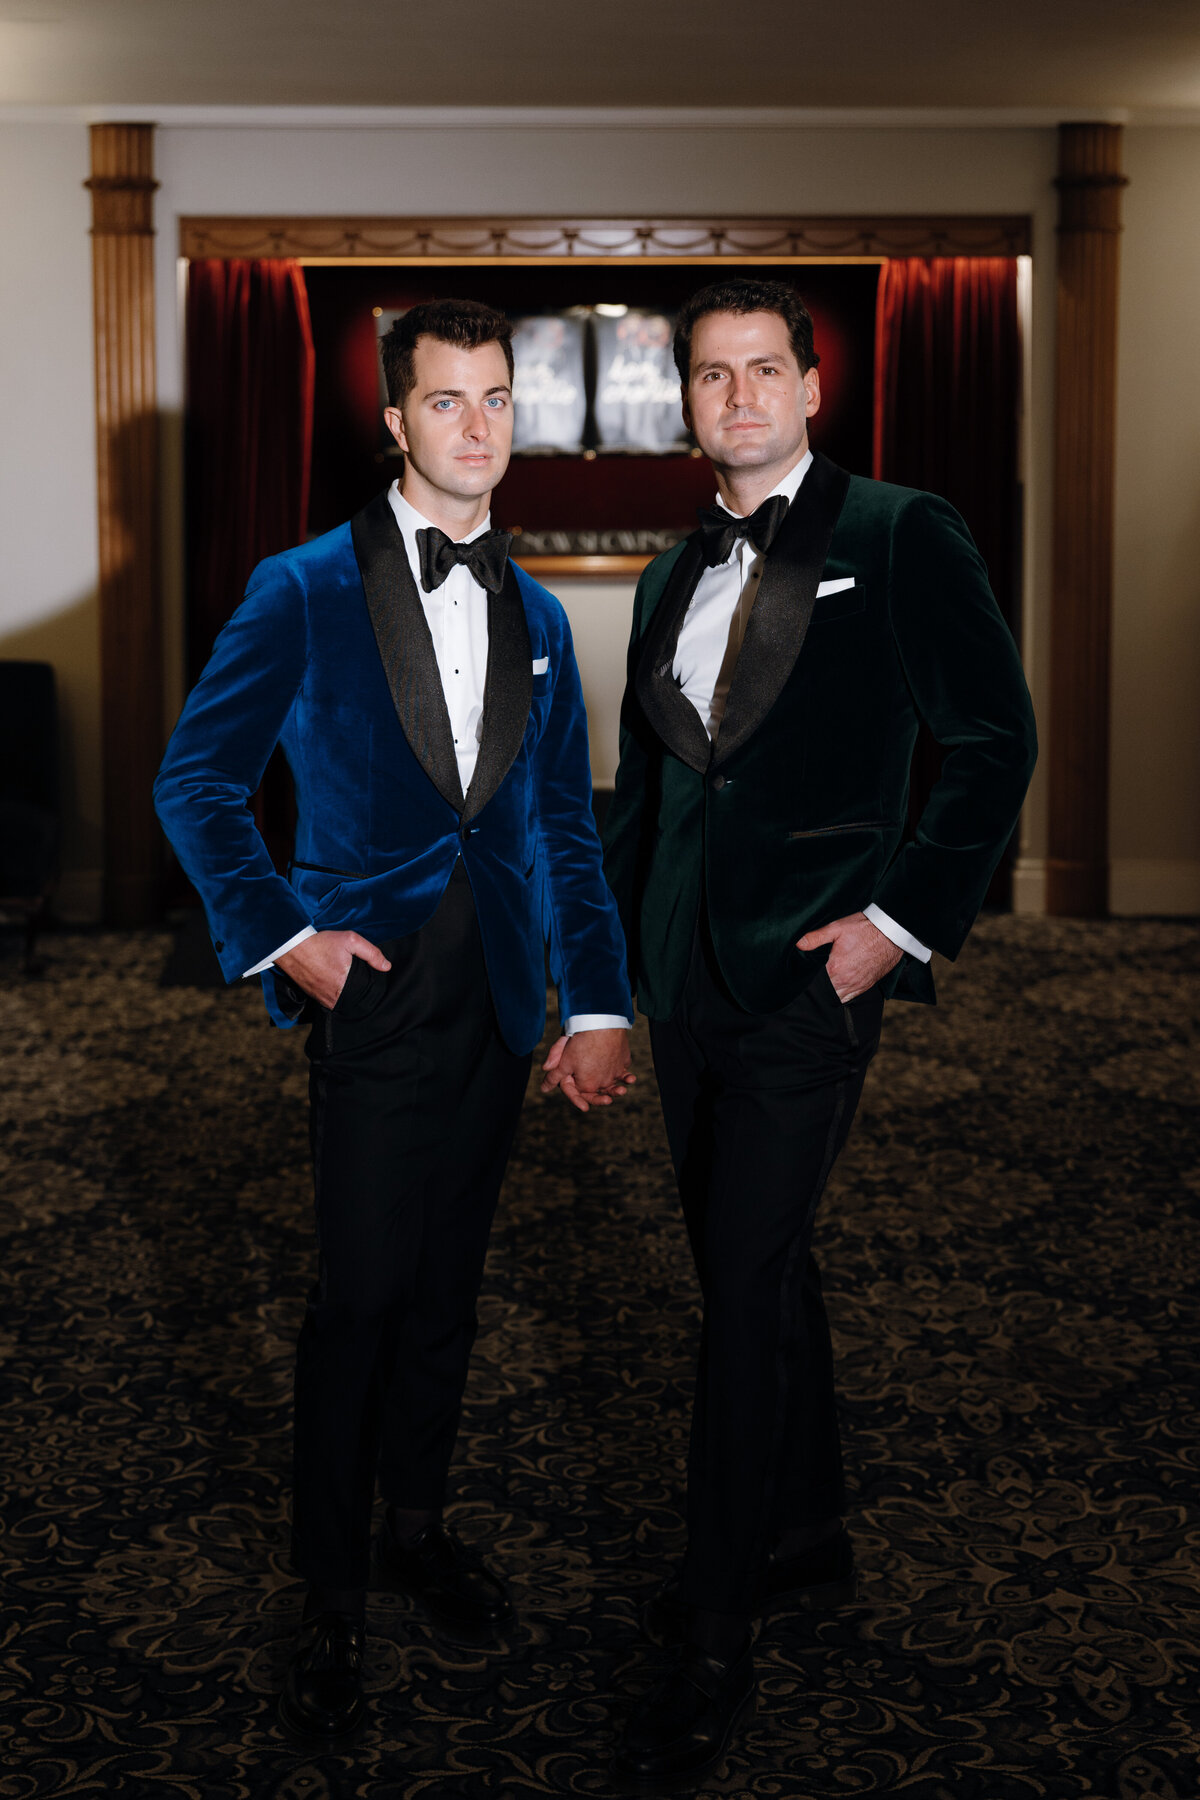 Two grooms posing inside the Regal Cinema for their wedding, a spotlight shining on them.